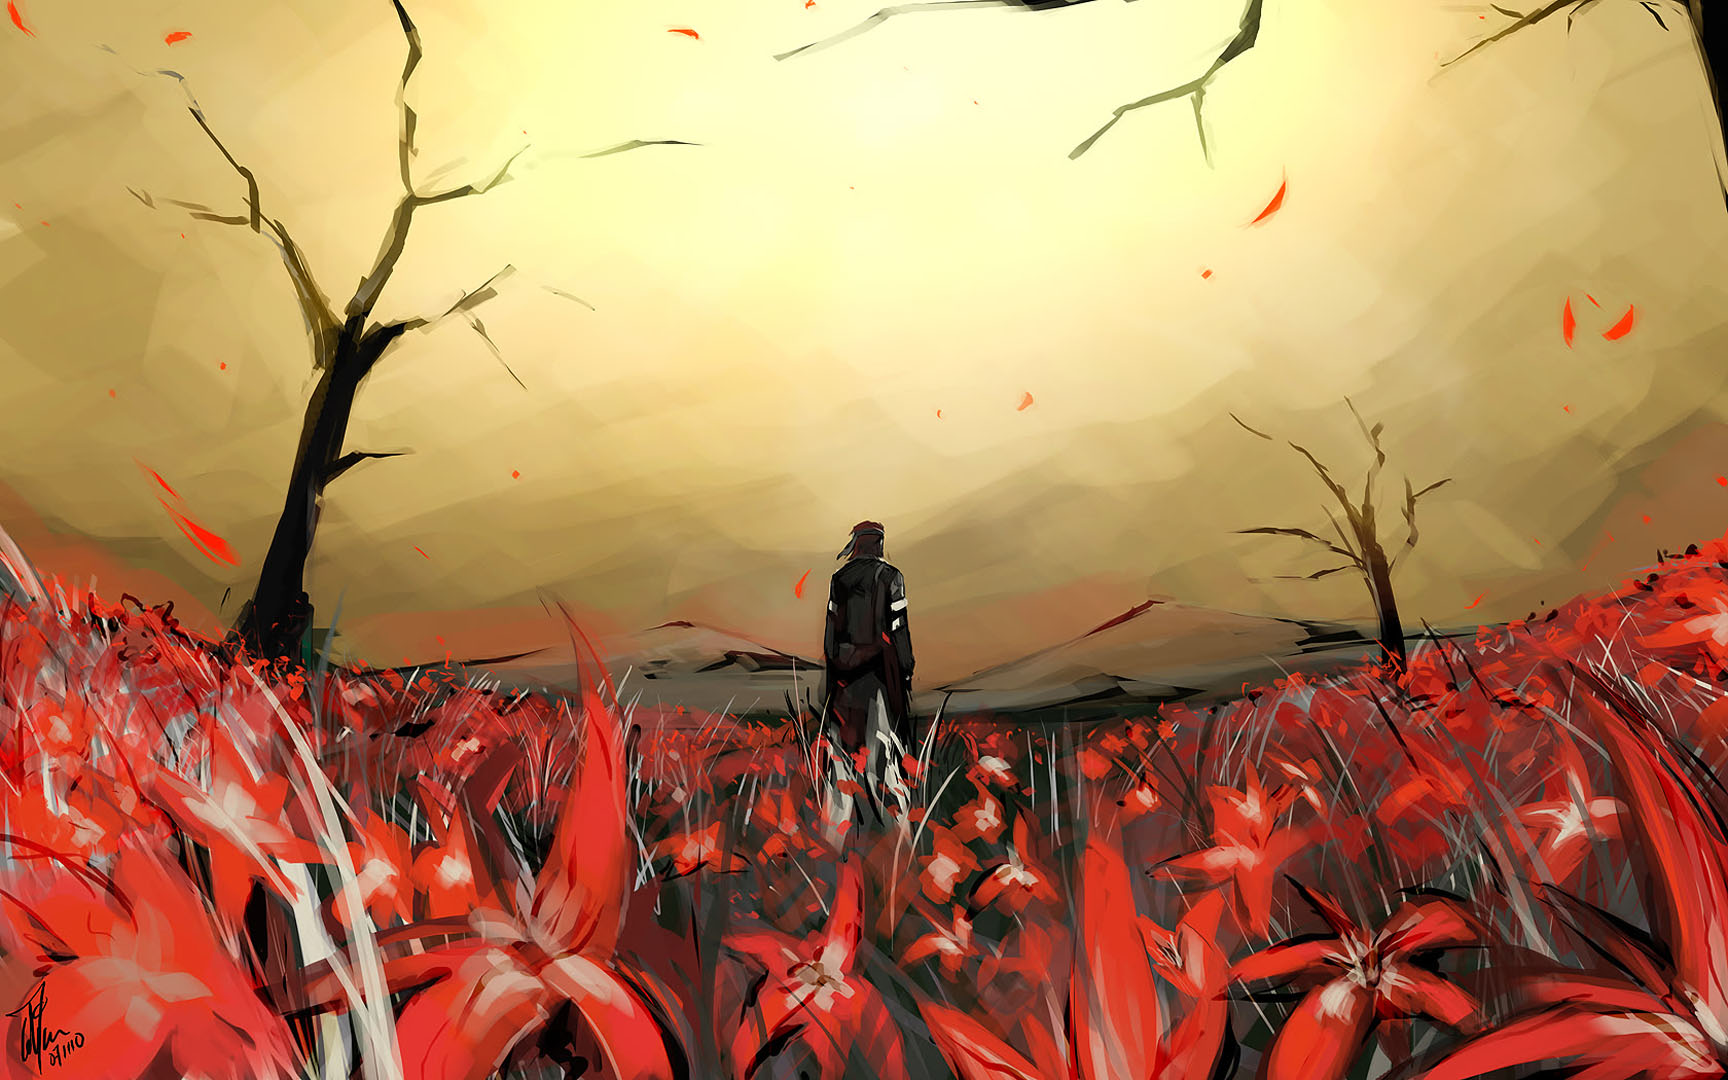 Surrounded By Red Flowers - Action Rpg Games Wallpaper Image ...